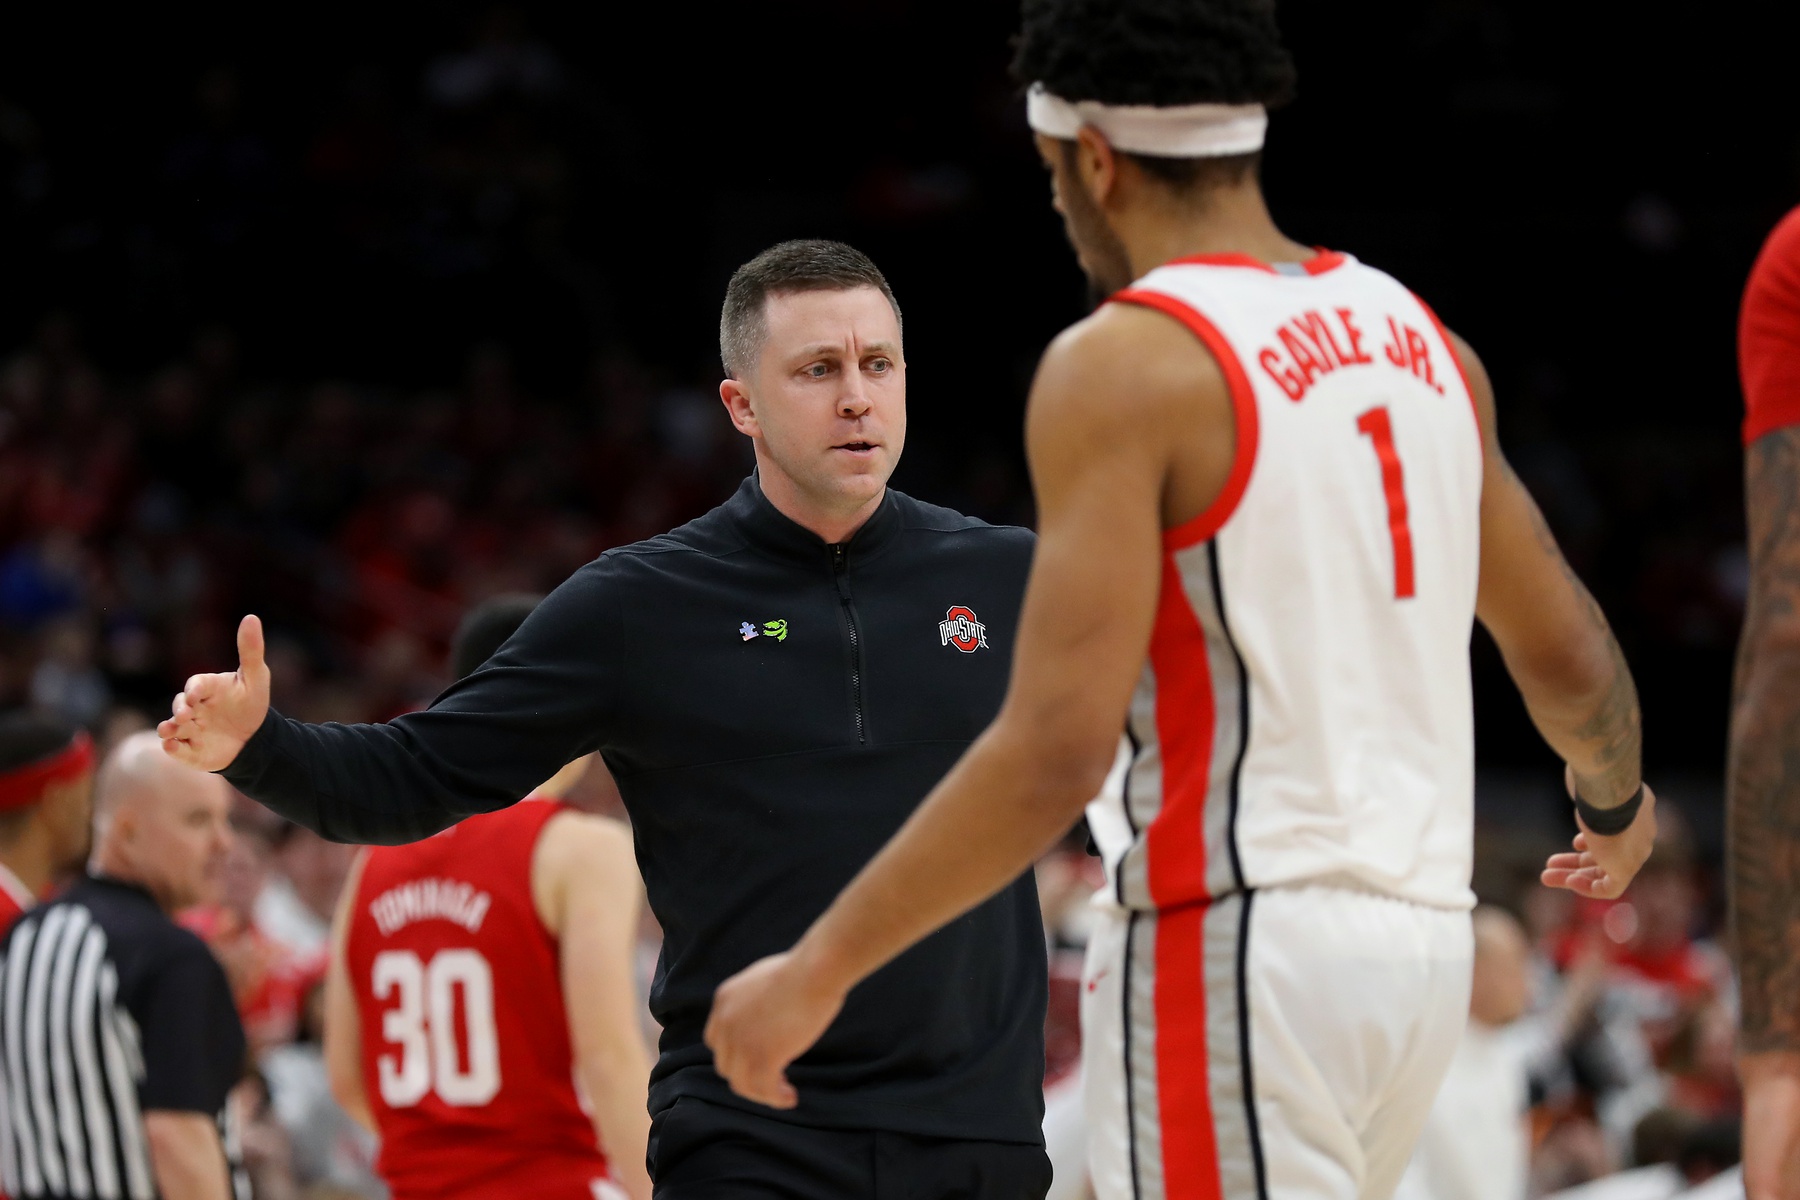 Jake Diebler is one of the potential candidates to be the next Ohio State mens basketball coach